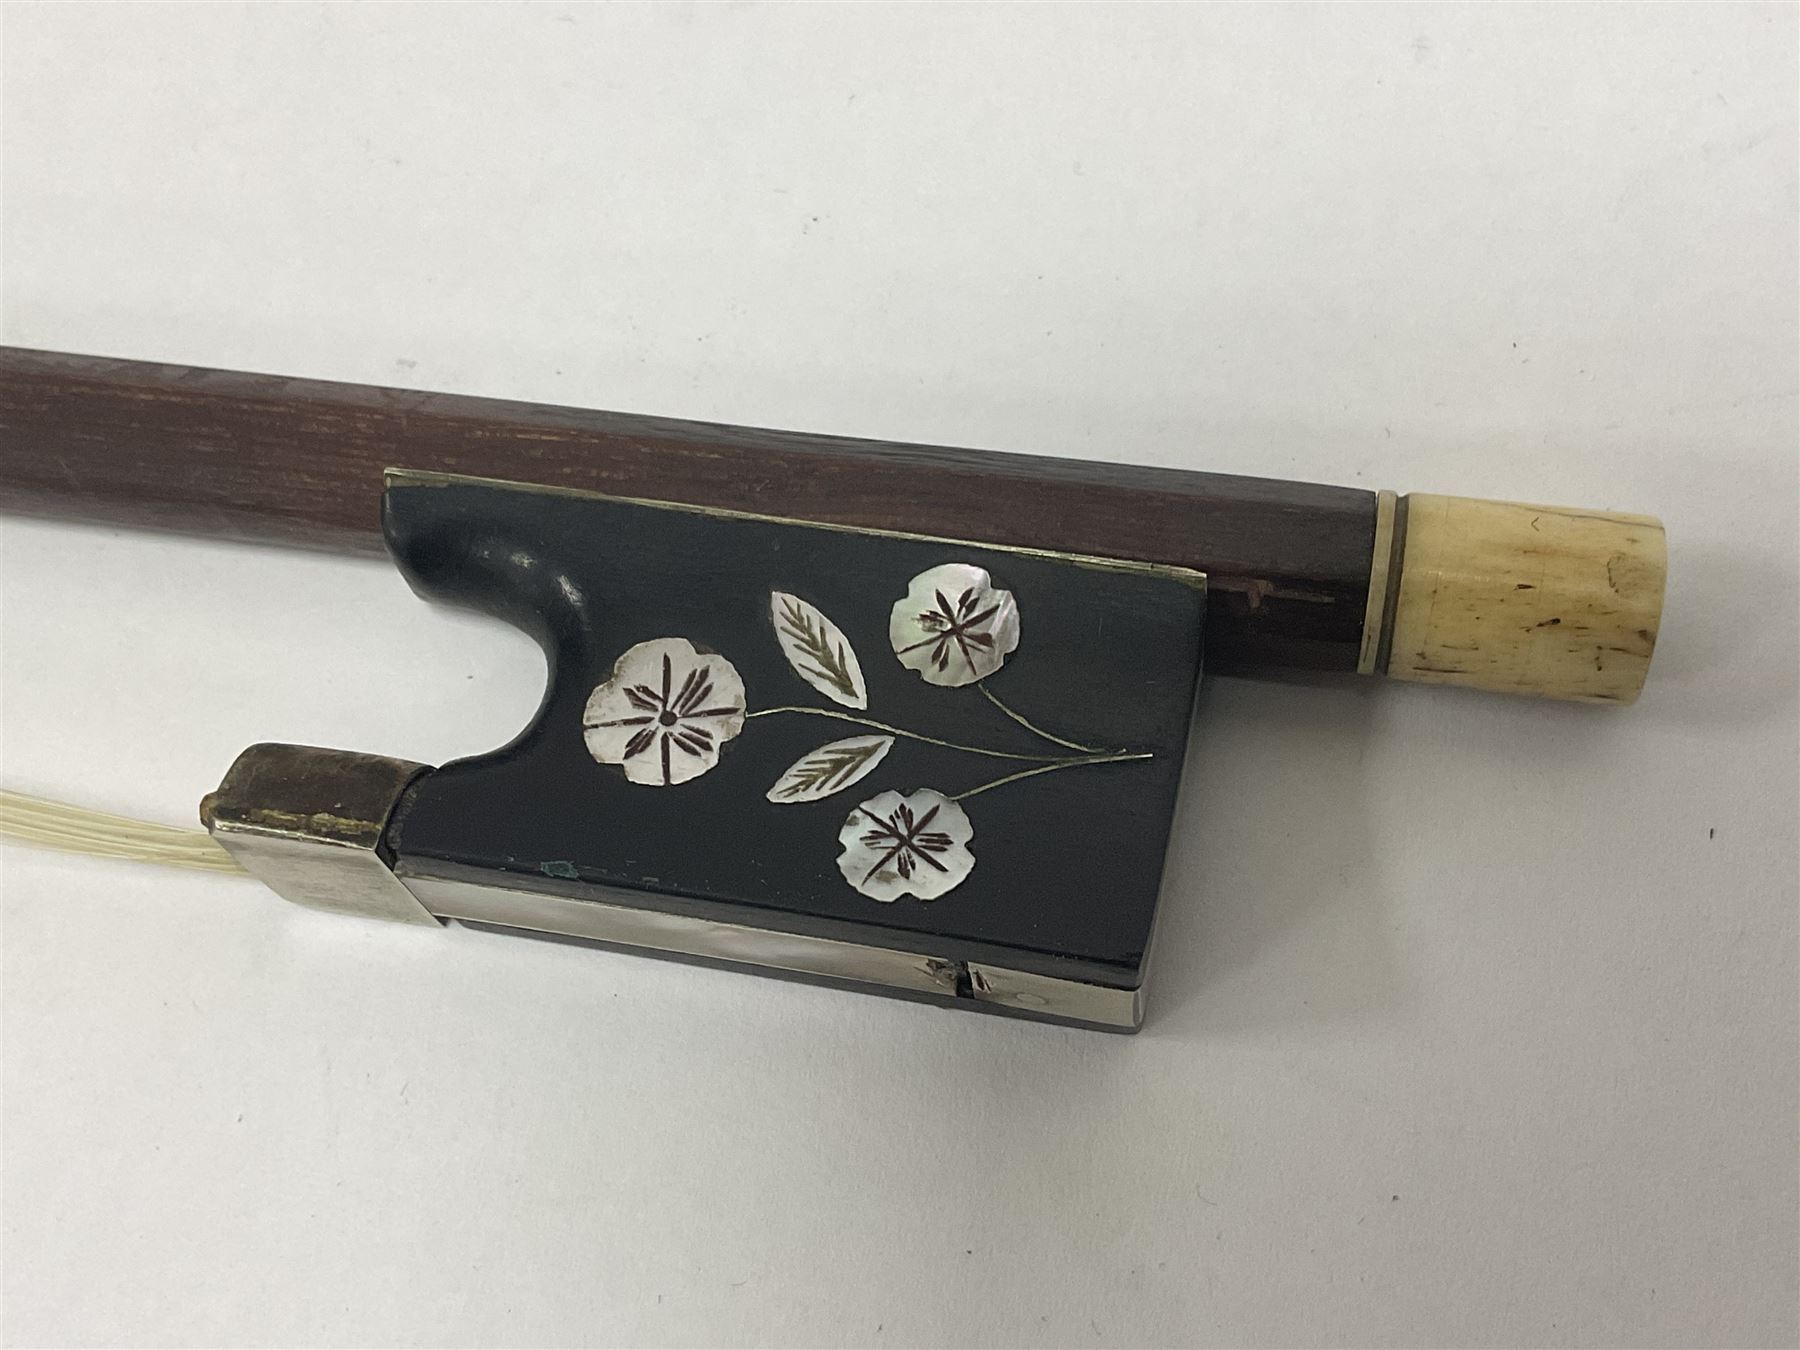 19th century wooden violin bow with a decorative mother of pearl inlay depicting flowers to the frog - Image 7 of 13